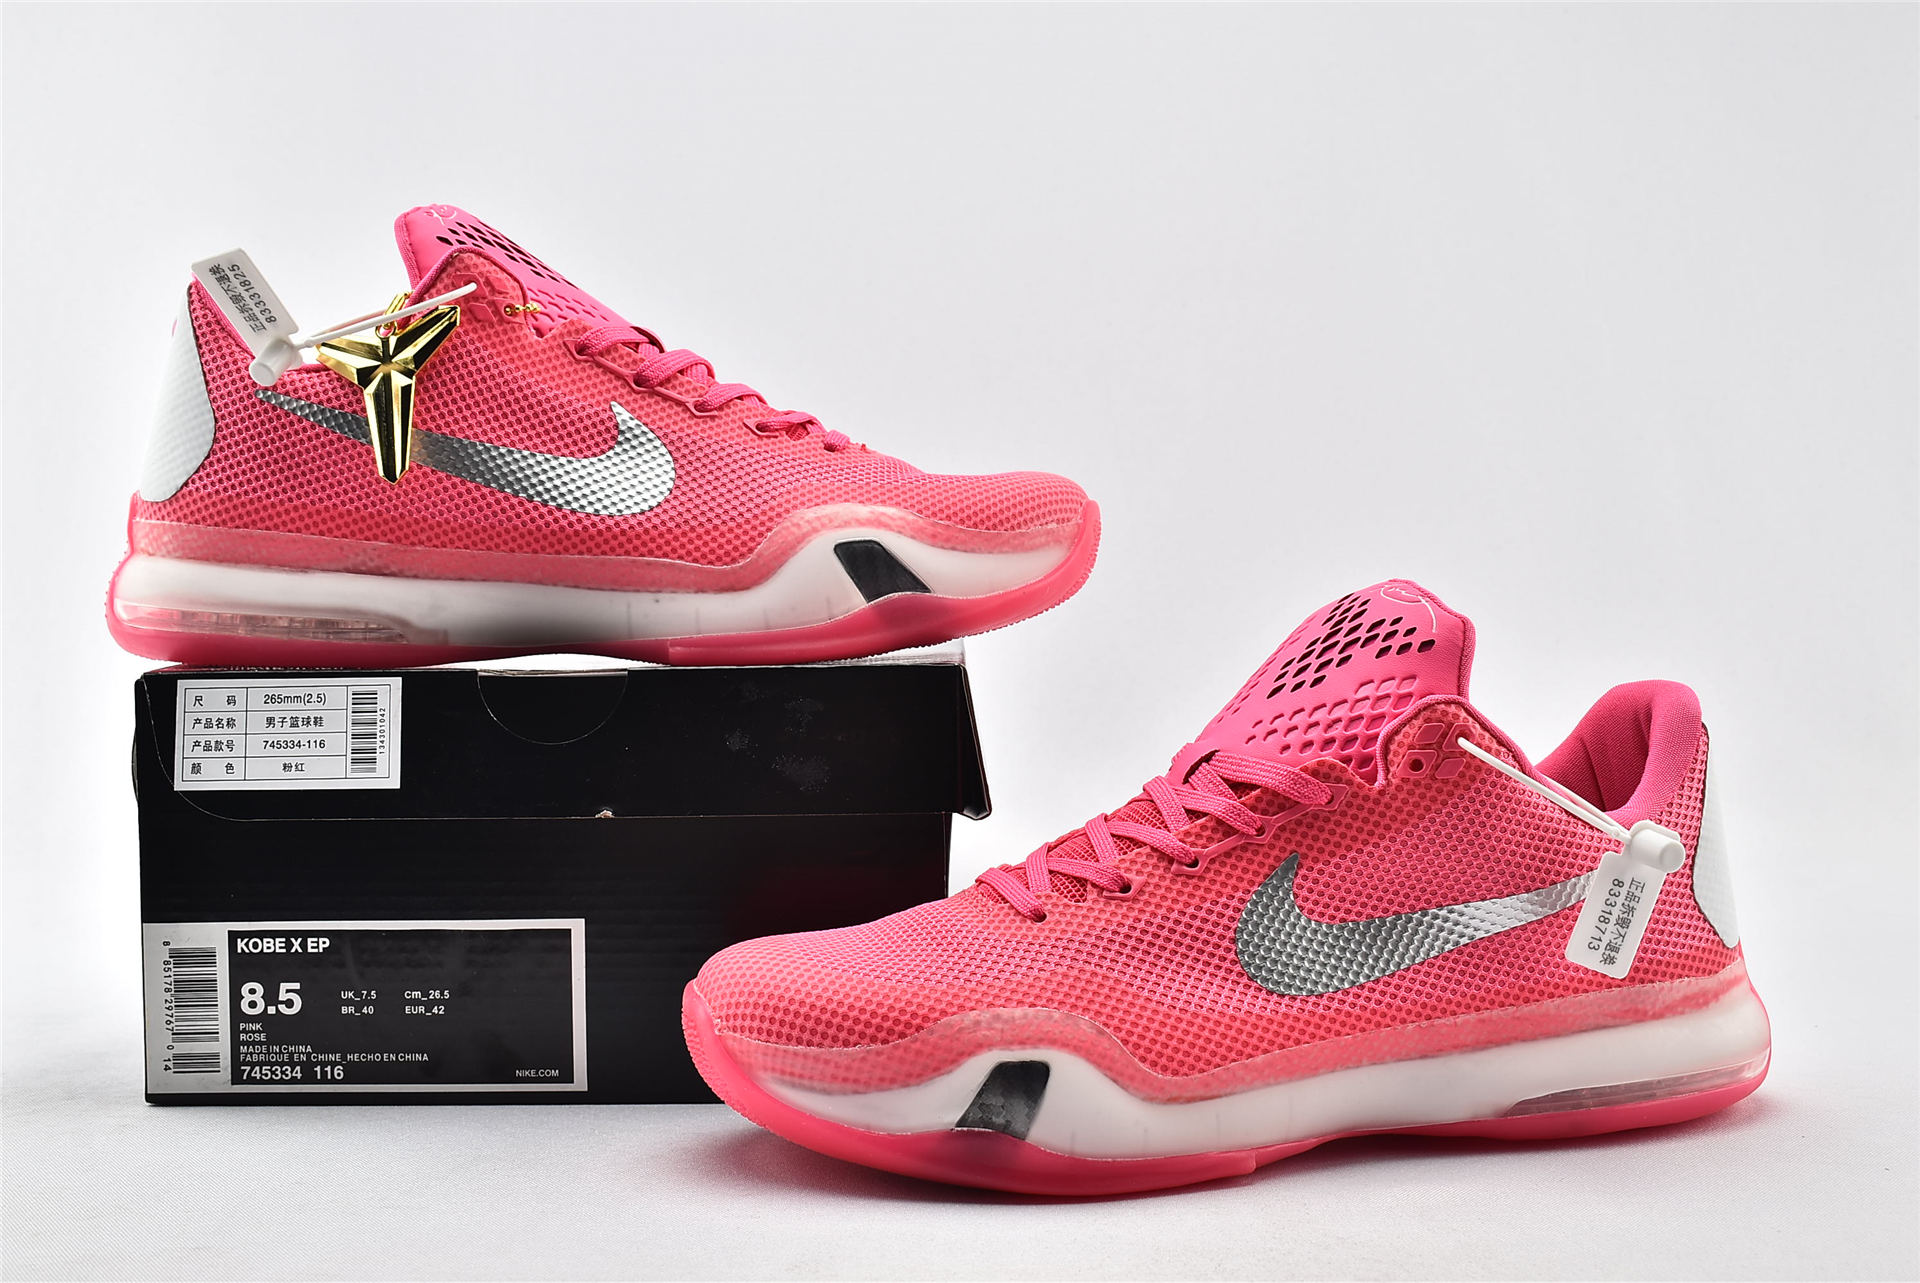 Nike Kobe 10 Think Pink For Sale The Sole Line